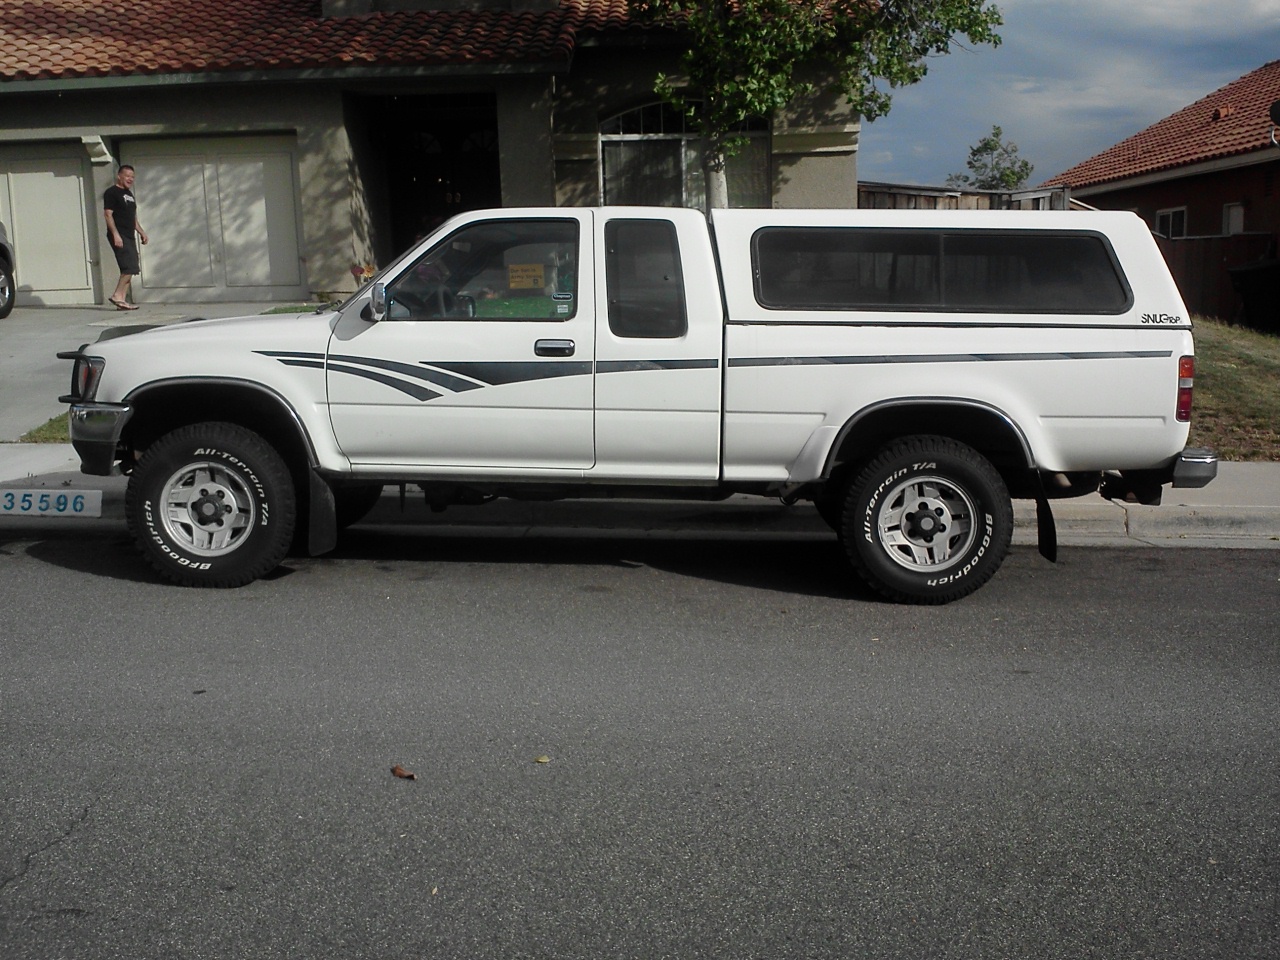 1992 toyota pickup extended cab specs #2